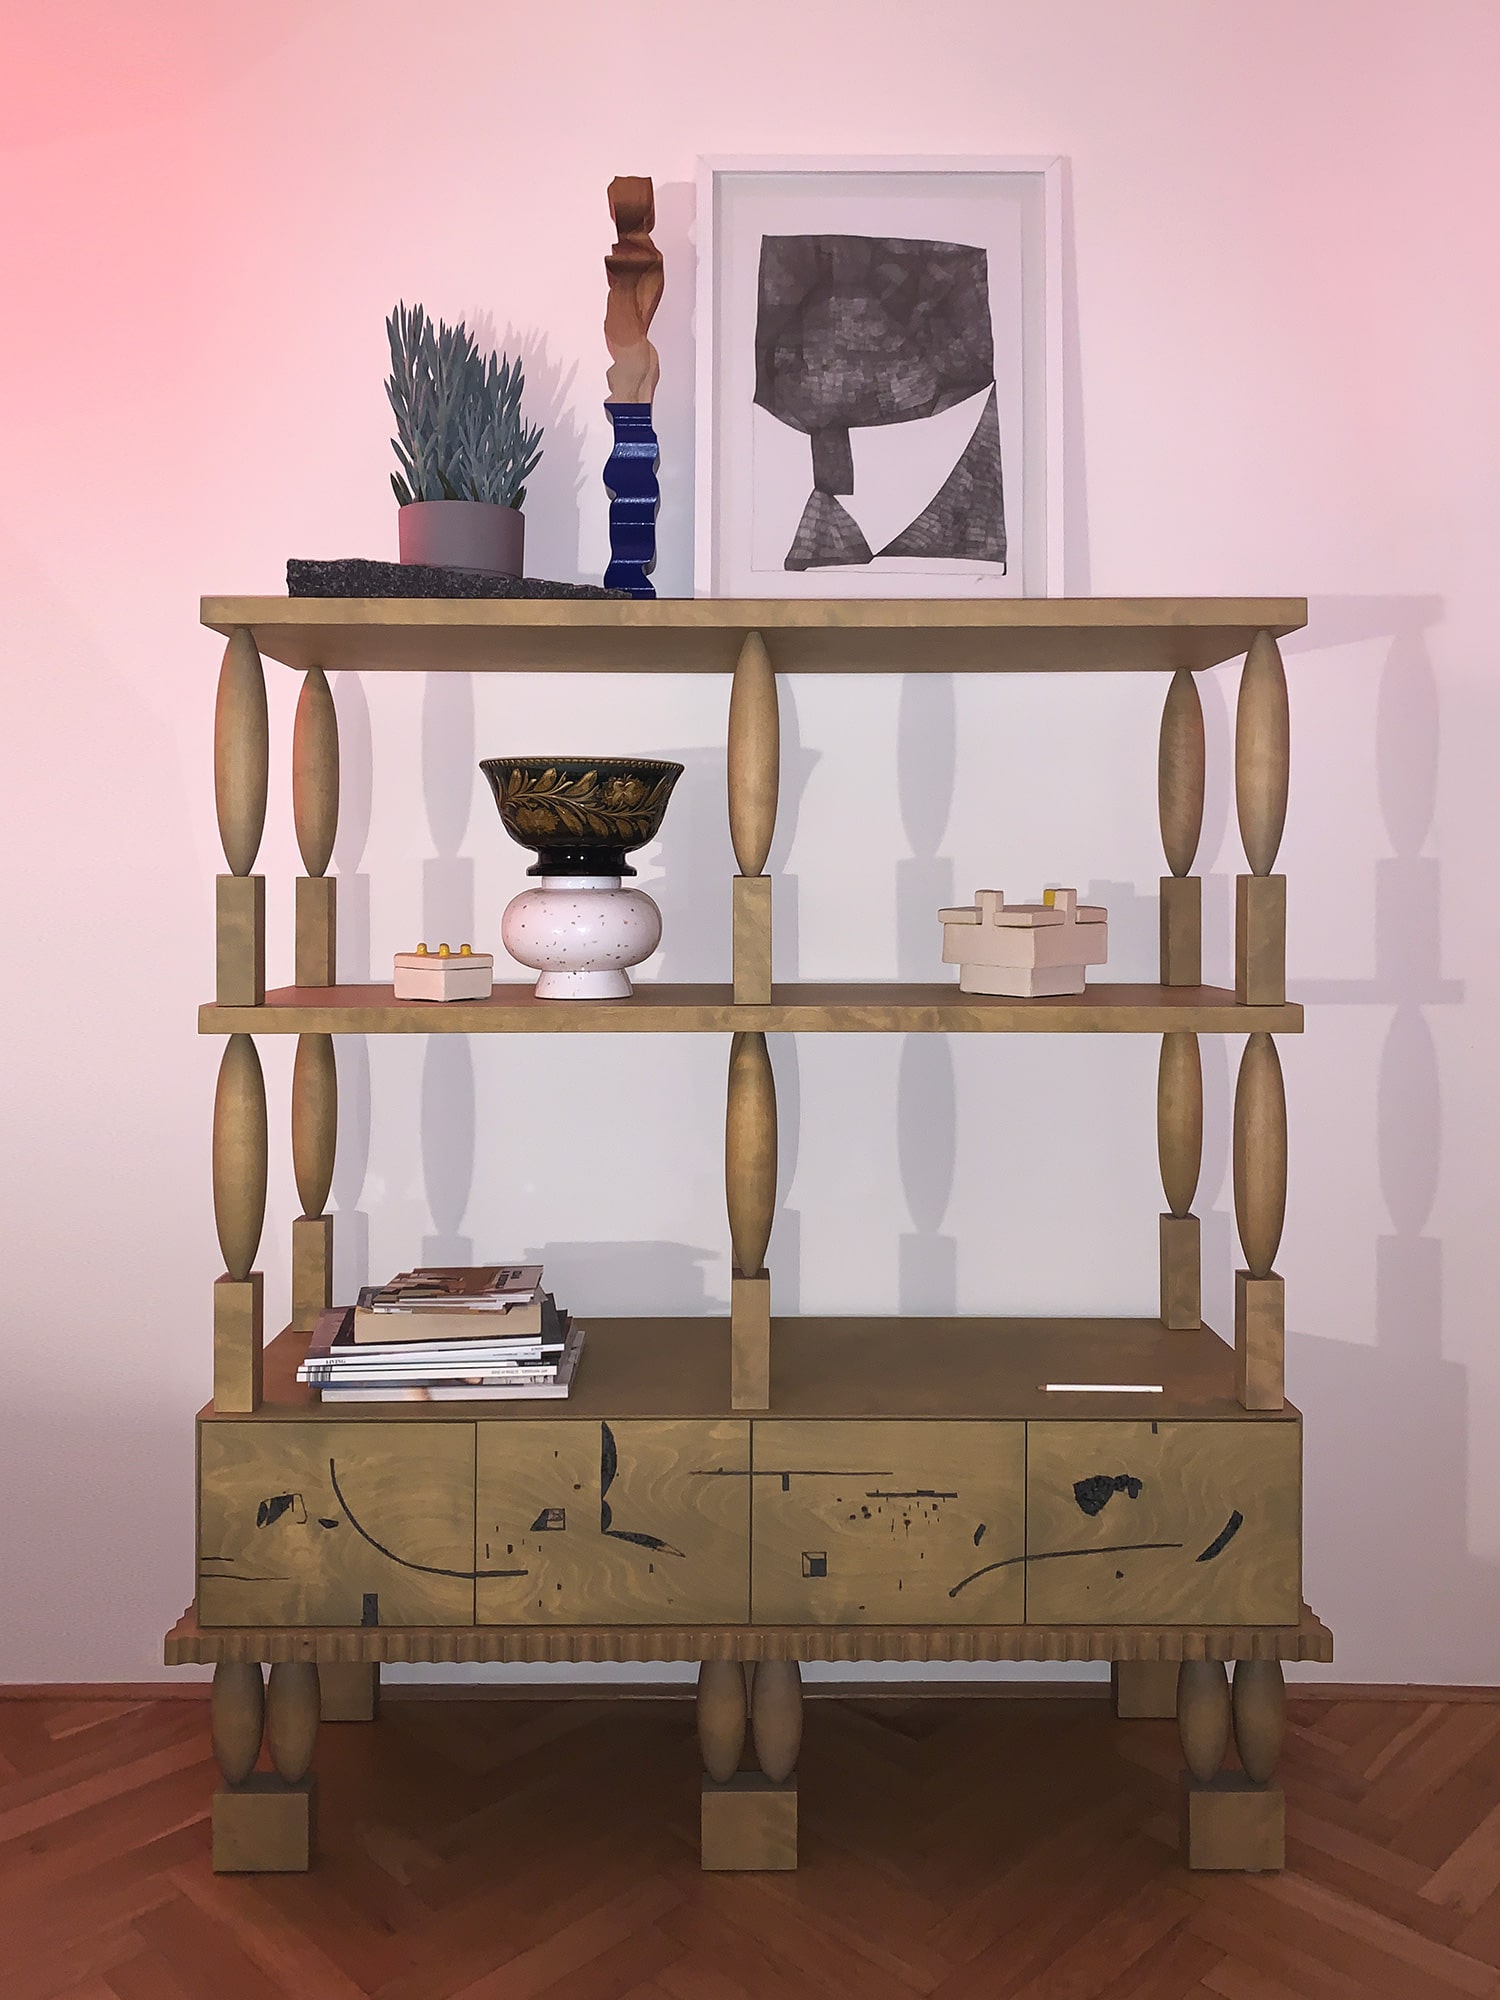 Nouveau collection_sculptural collectible furniture_cabinets and shelving units_limited edition_design by Jiri Krejcirik x pyrography drawings by Taja Spasskova_2021_Cabinet CI4I2_1